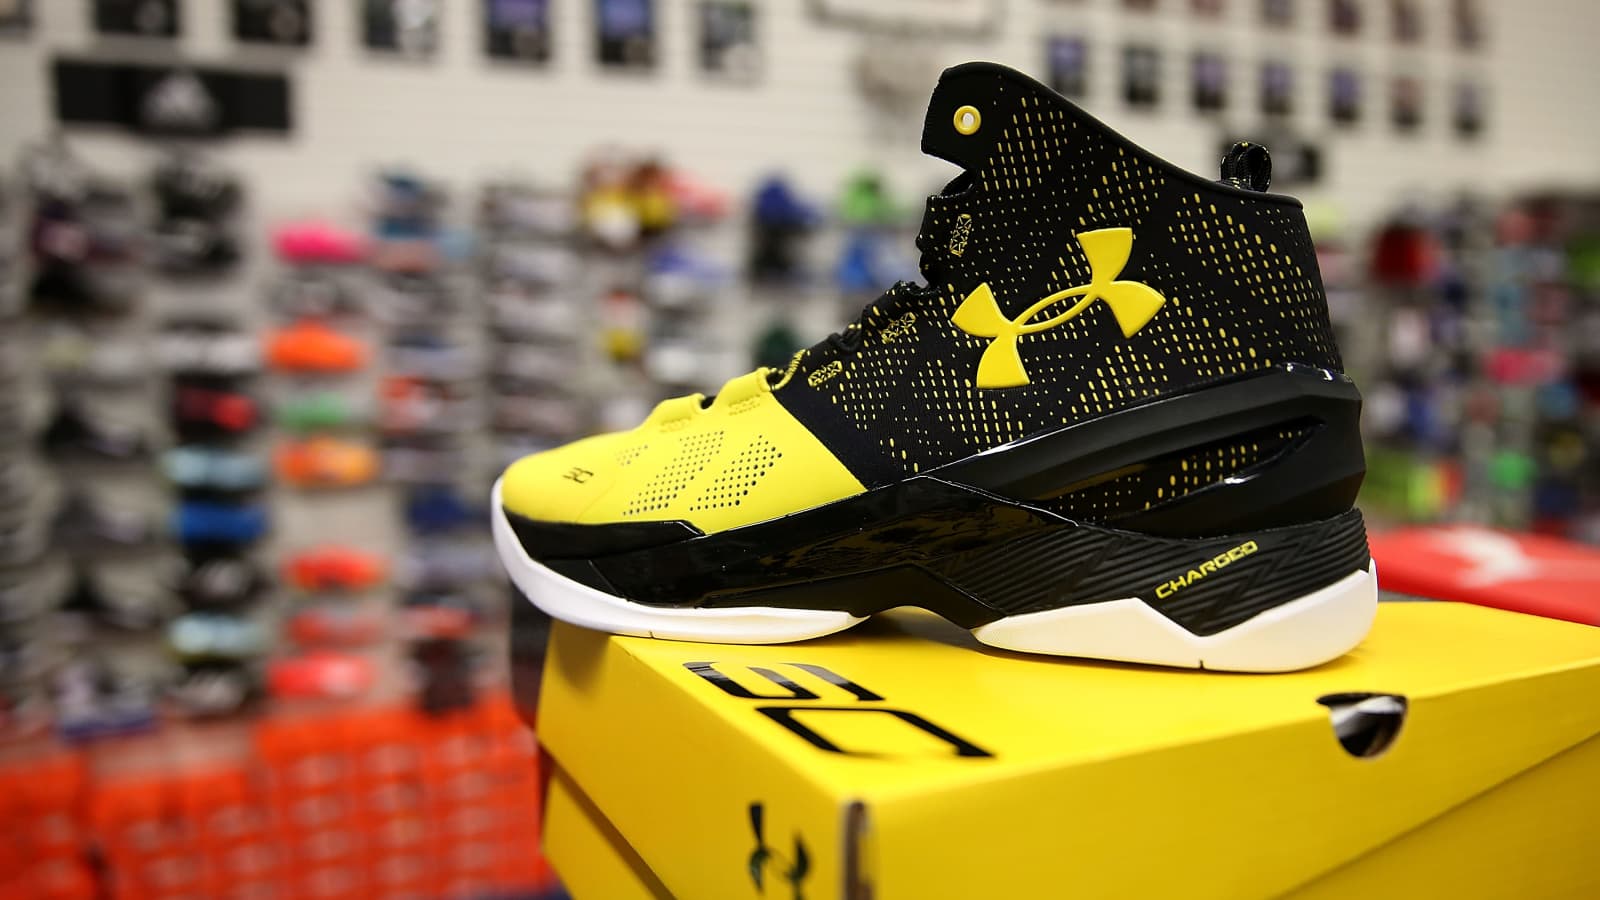 Are Under Armour Shoes Cool? - Shoe Effect